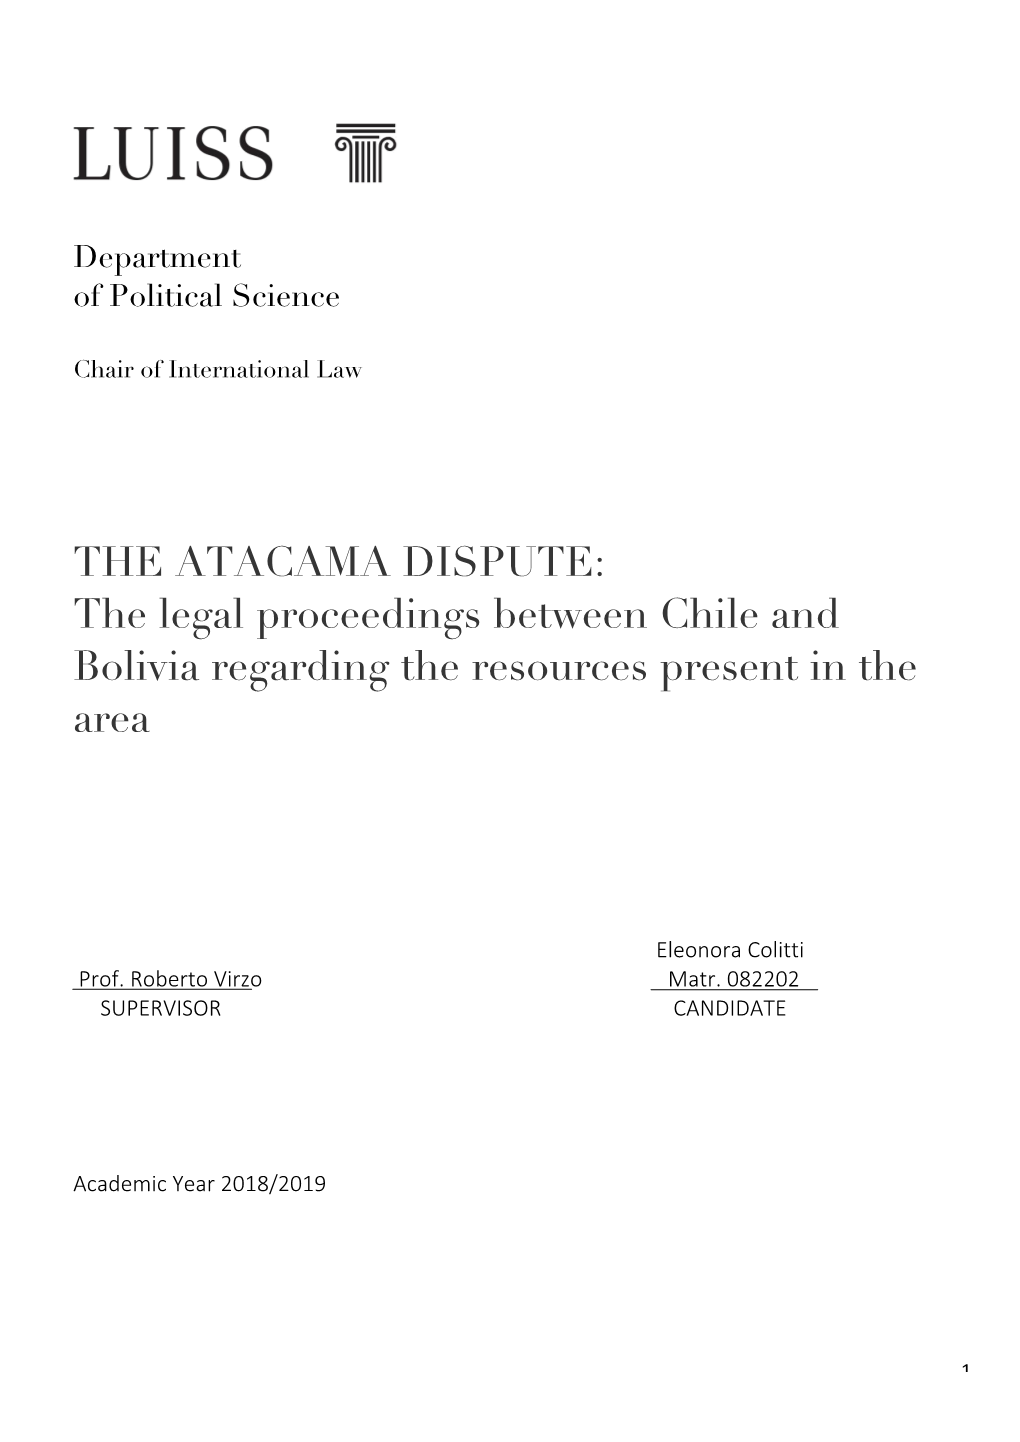 THE ATACAMA DISPUTE: the Legal Proceedings Between Chile and Bolivia Regarding the Resources Present in the Area